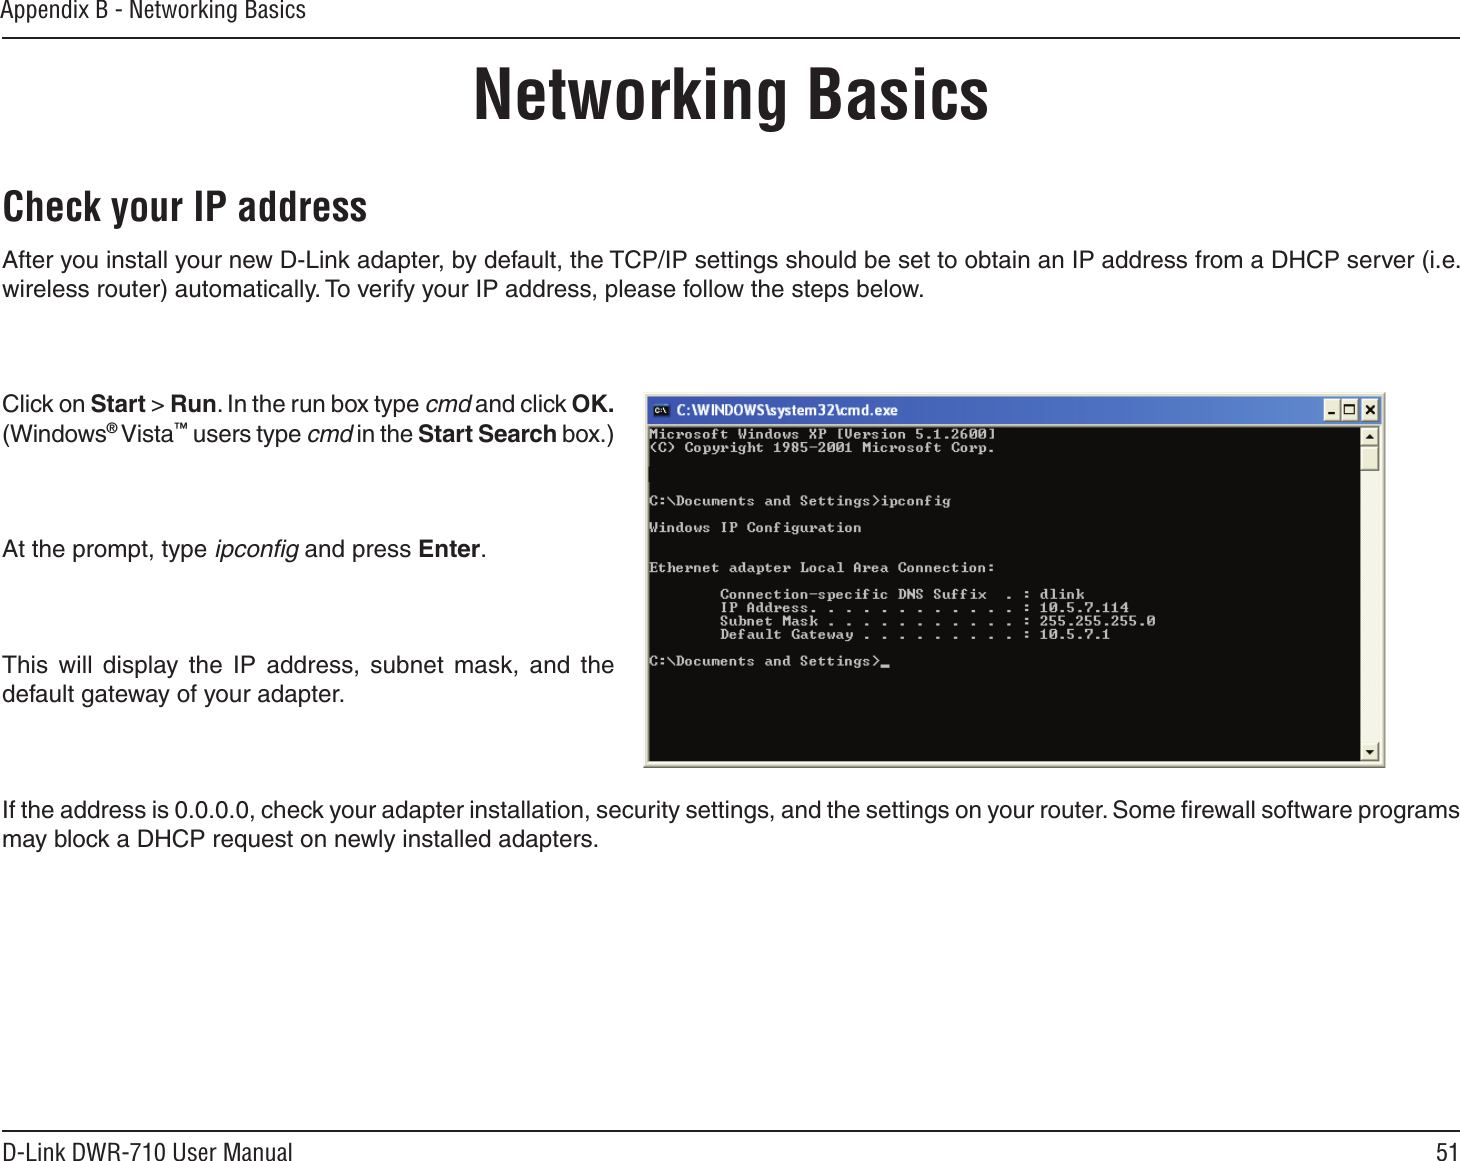 51D-Link DWR-710 User ManualAppendix B - Networking BasicsNetworking BasicsCheck your IP addressAfter you install your new D-Link adapter, by default, the TCP/IP settings should be set to obtain an IP address from a DHCP server (i.e. wireless router) automatically. To verify your IP address, please follow the steps below.Click on Start &gt; Run. In the run box type cmd and click OK. (Windows® Vista™ users type cmd in the Start Search box.)At the prompt, type ipconﬁg and press Enter.This  will  display the  IP  address,  subnet  mask,  and  the default gateway of your adapter.If the address is 0.0.0.0, check your adapter installation, security settings, and the settings on your router. Some ﬁrewall software programs may block a DHCP request on newly installed adapters. 